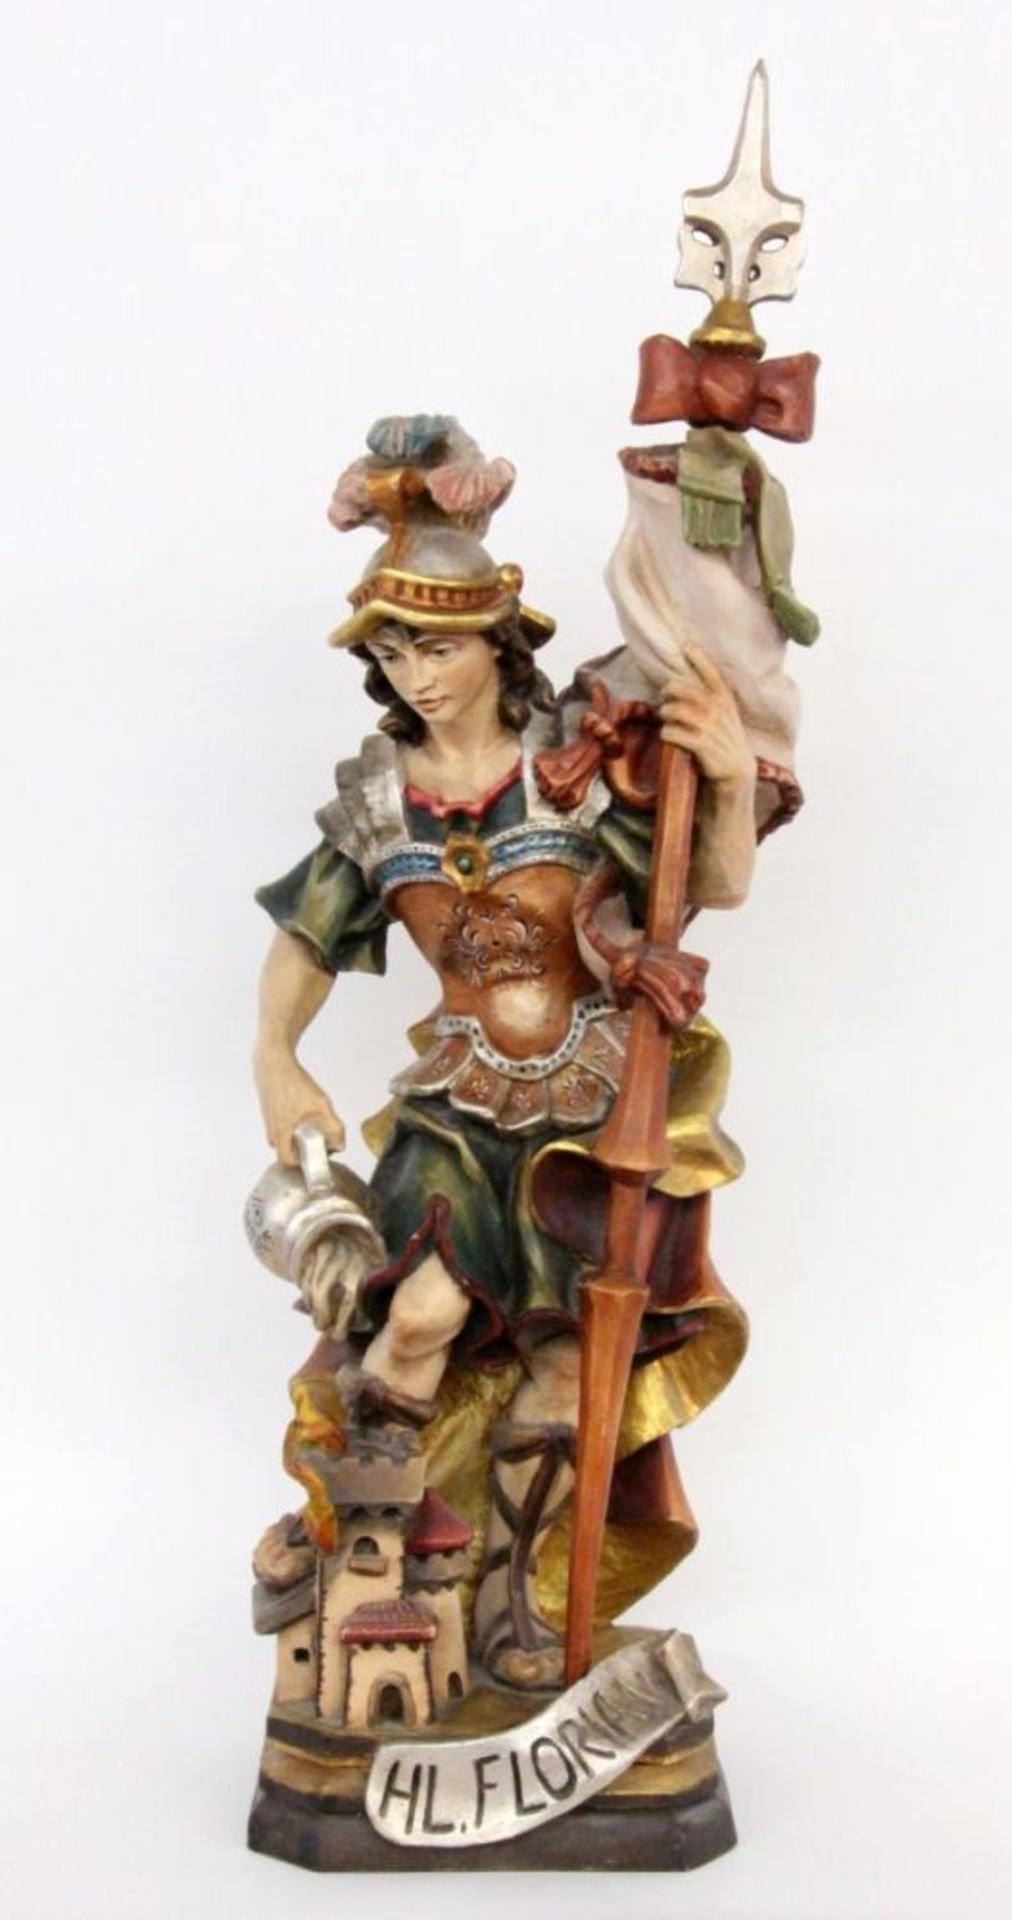 SAINT FLORIAN Alpine, 20th century Wooden sculpture, carved and painted in colour. 106 cm